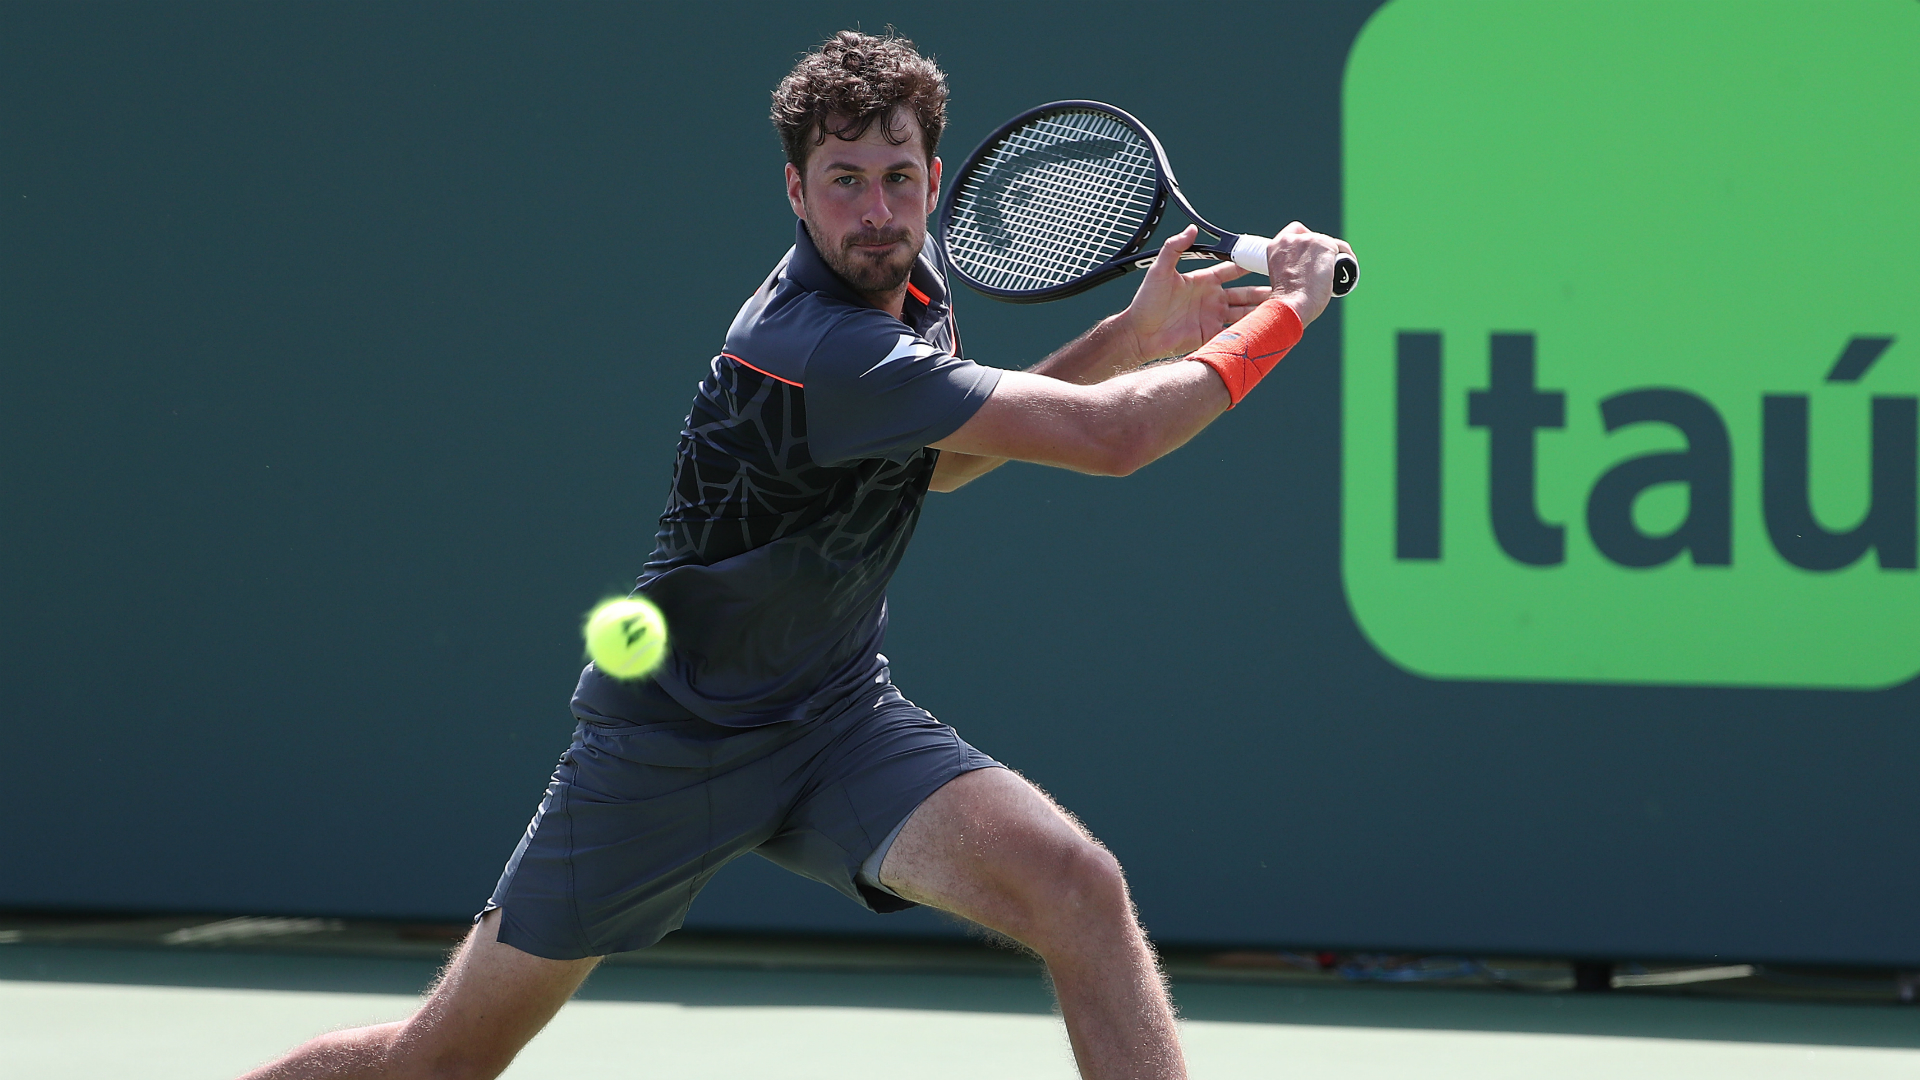 Indian Wells Masters champion Juan Martin del Potro is next up for Dutchman Robin Haase, who saw off Yuichi Sugita in Miami on Wednesday.